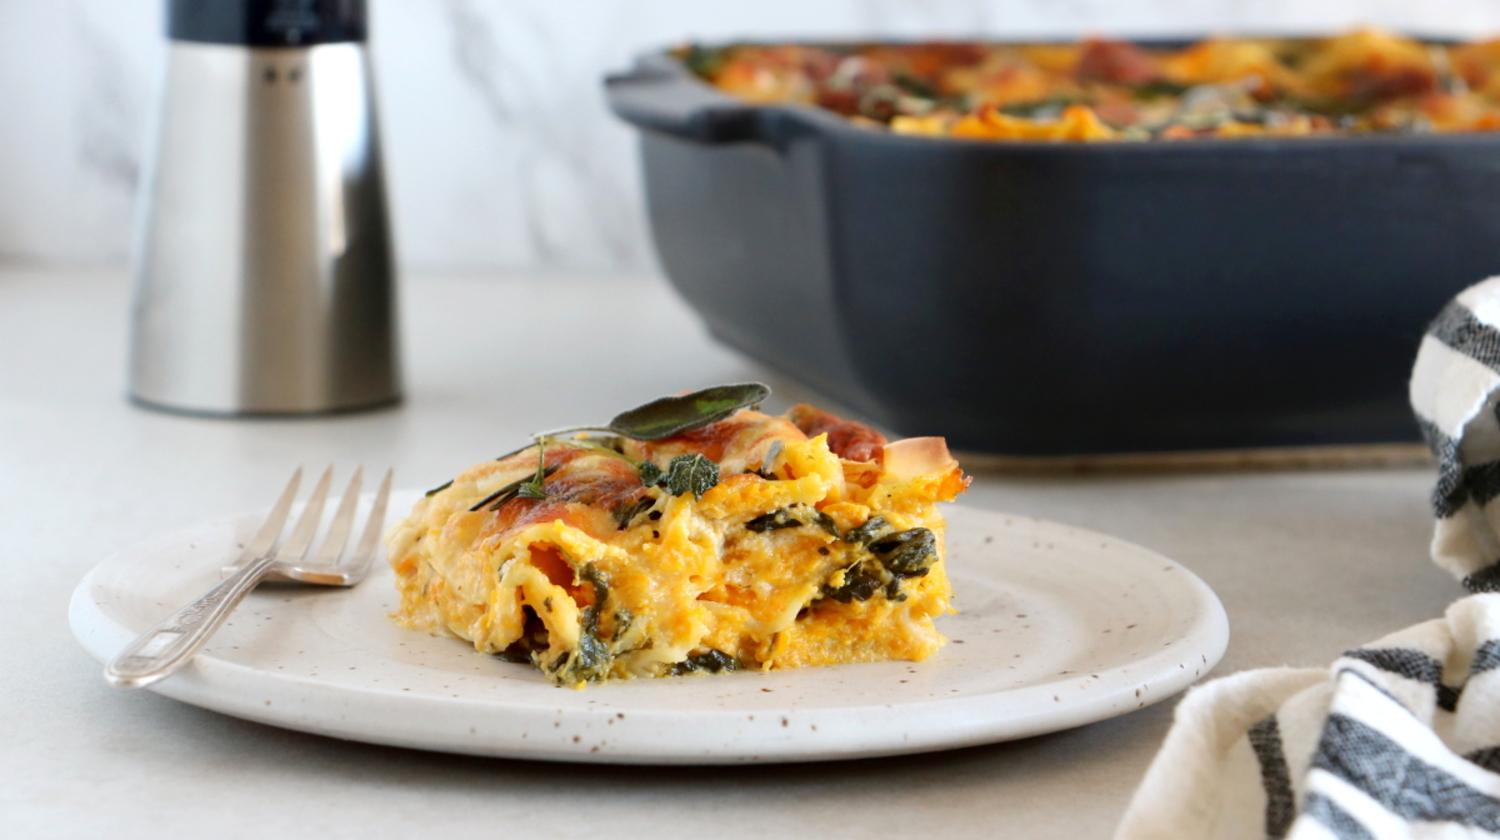 Butternut Squash, Spinach and Goat Cheese Lasagna - Peugeot Saveurs